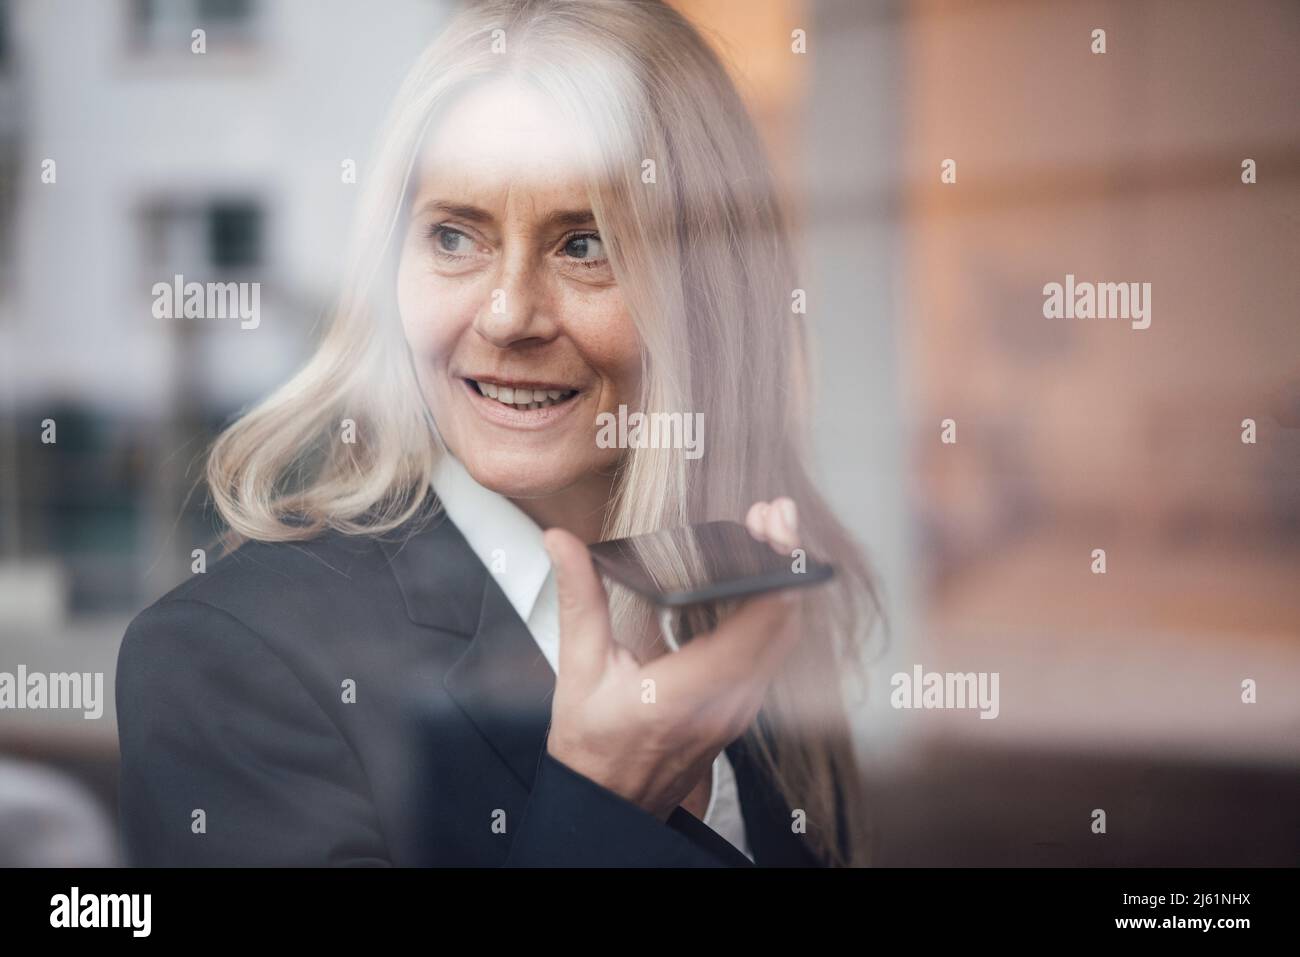 Businesswoman sending voicemail over smart phone seen through glass of work place Stock Photo